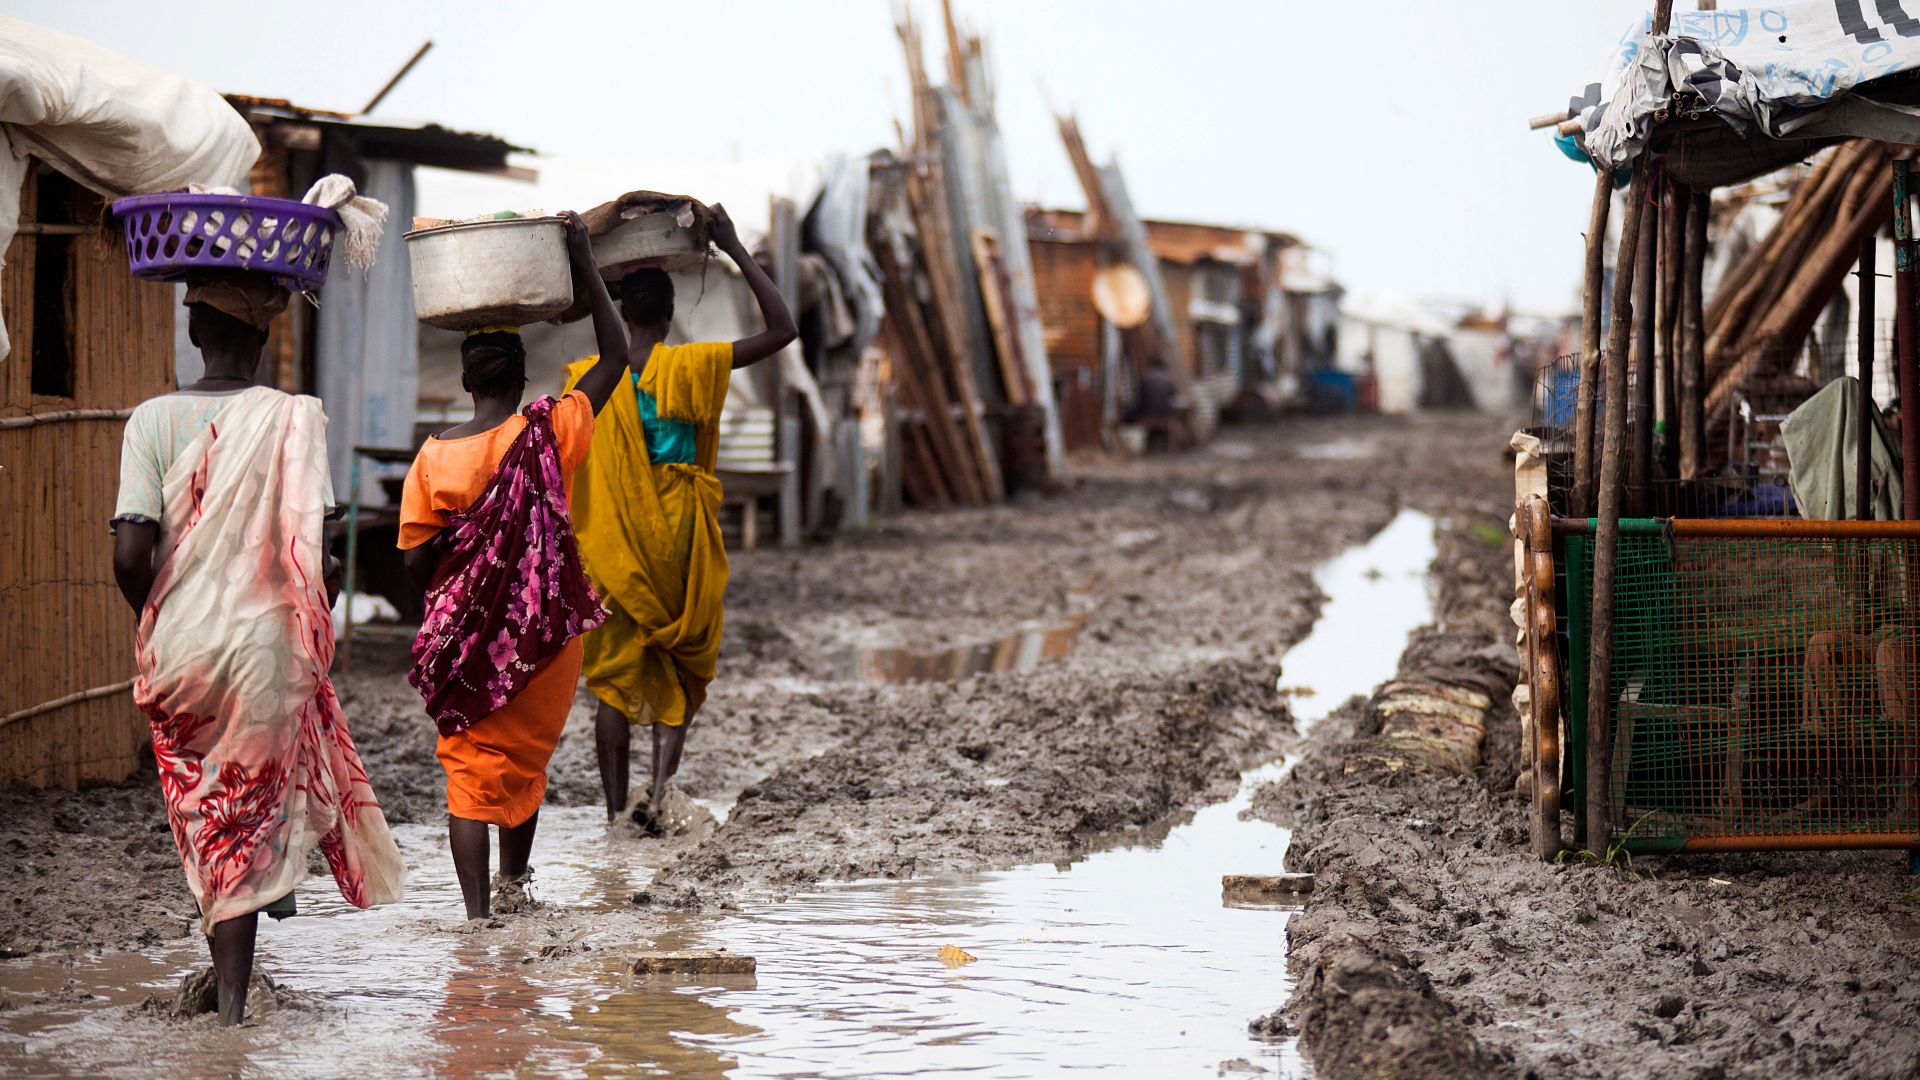 Women carry their belongings inside the Protection of Civilians (PoC) site in Malakal, on June 14, 2016